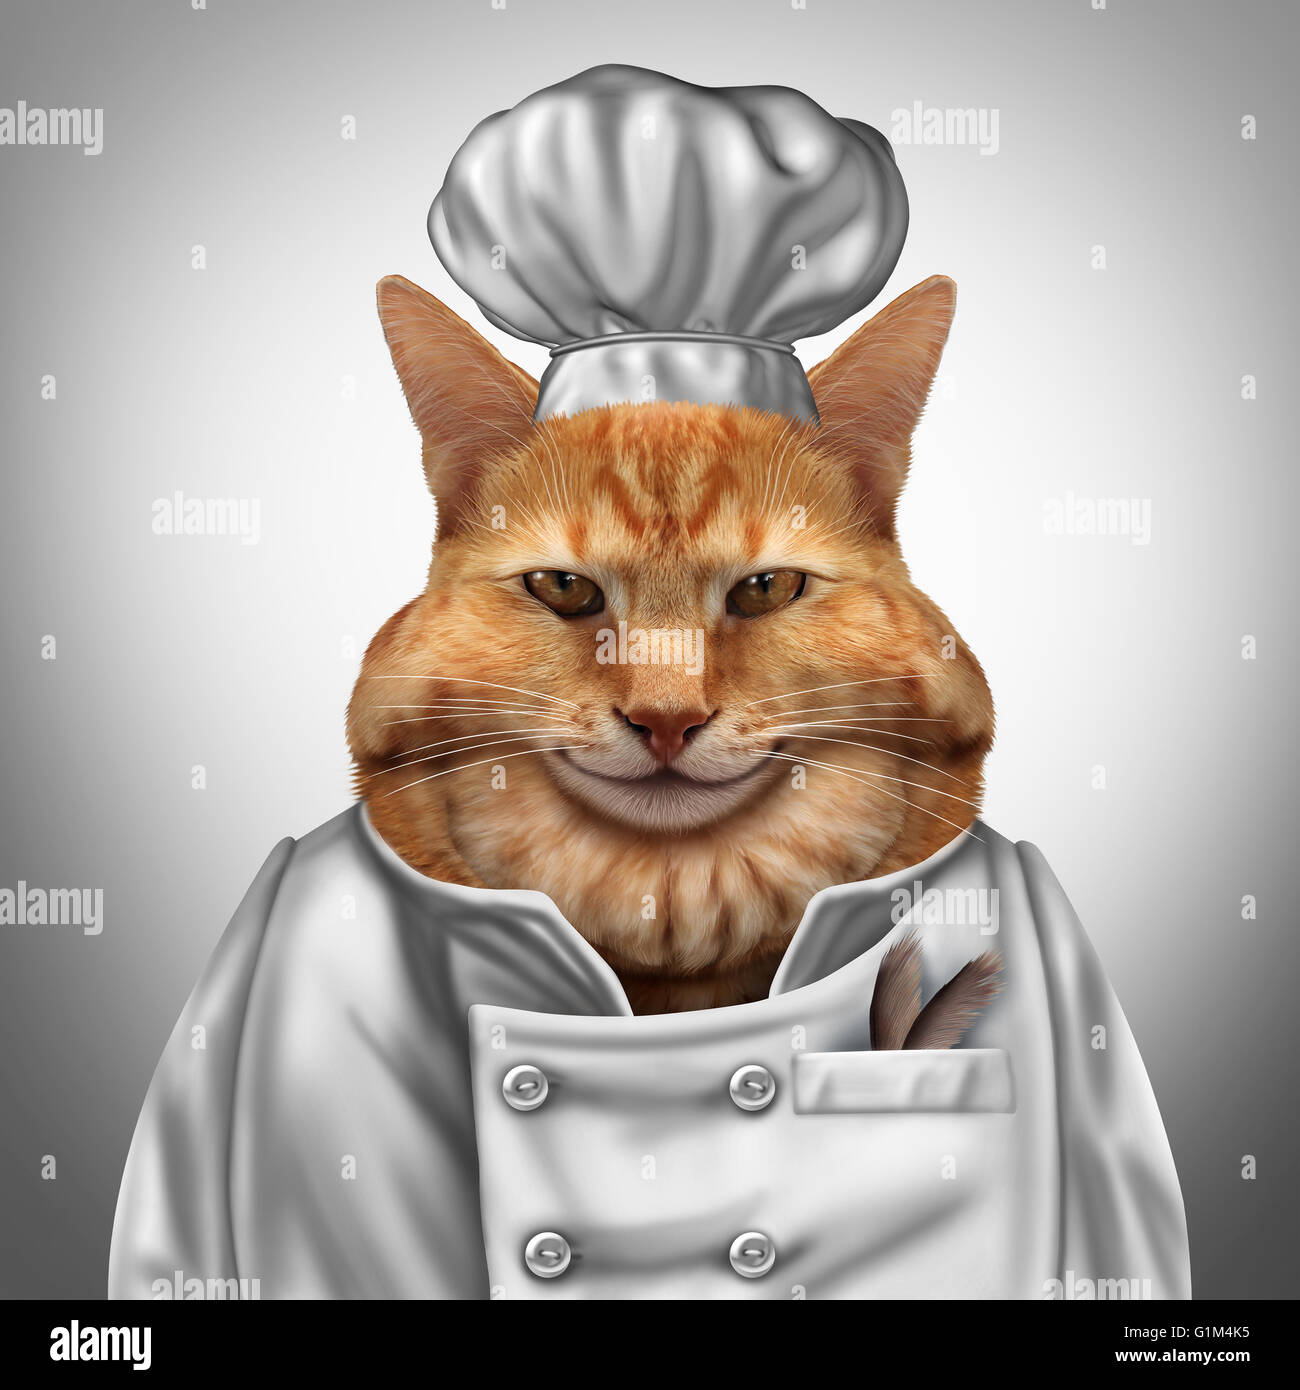 Cat chef humorous concept as a fat feline wearing a cook uniform  with feathers in a pocket as a veterinarian pet nutrition symbol with 3D illustration elememnts. Stock Photo